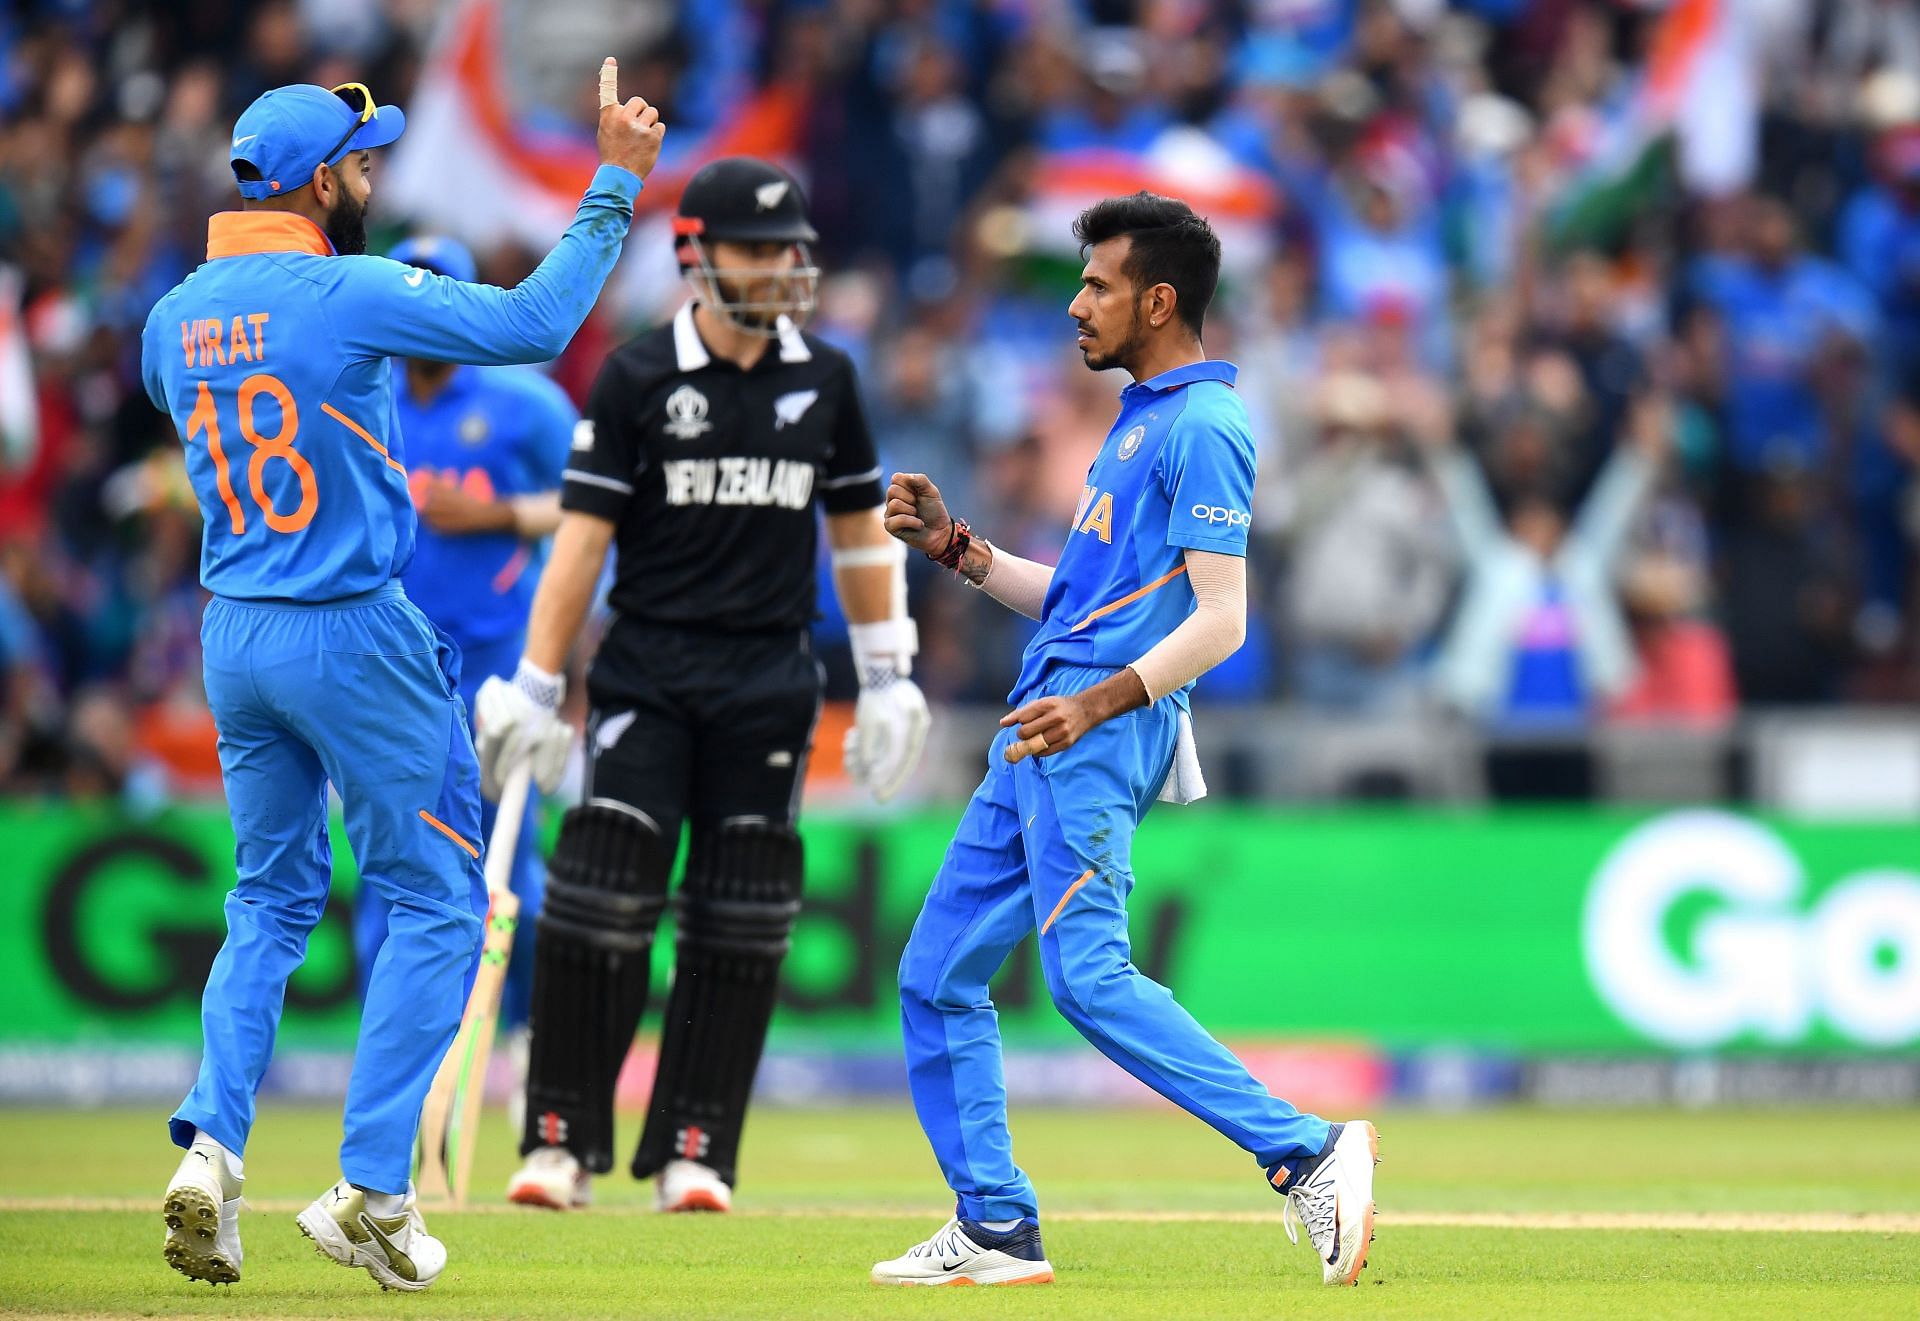 Yuzvendra Chahal is the most successful Indian spinner against New Zealand but he&#039;s not present in the T20 World Cup team